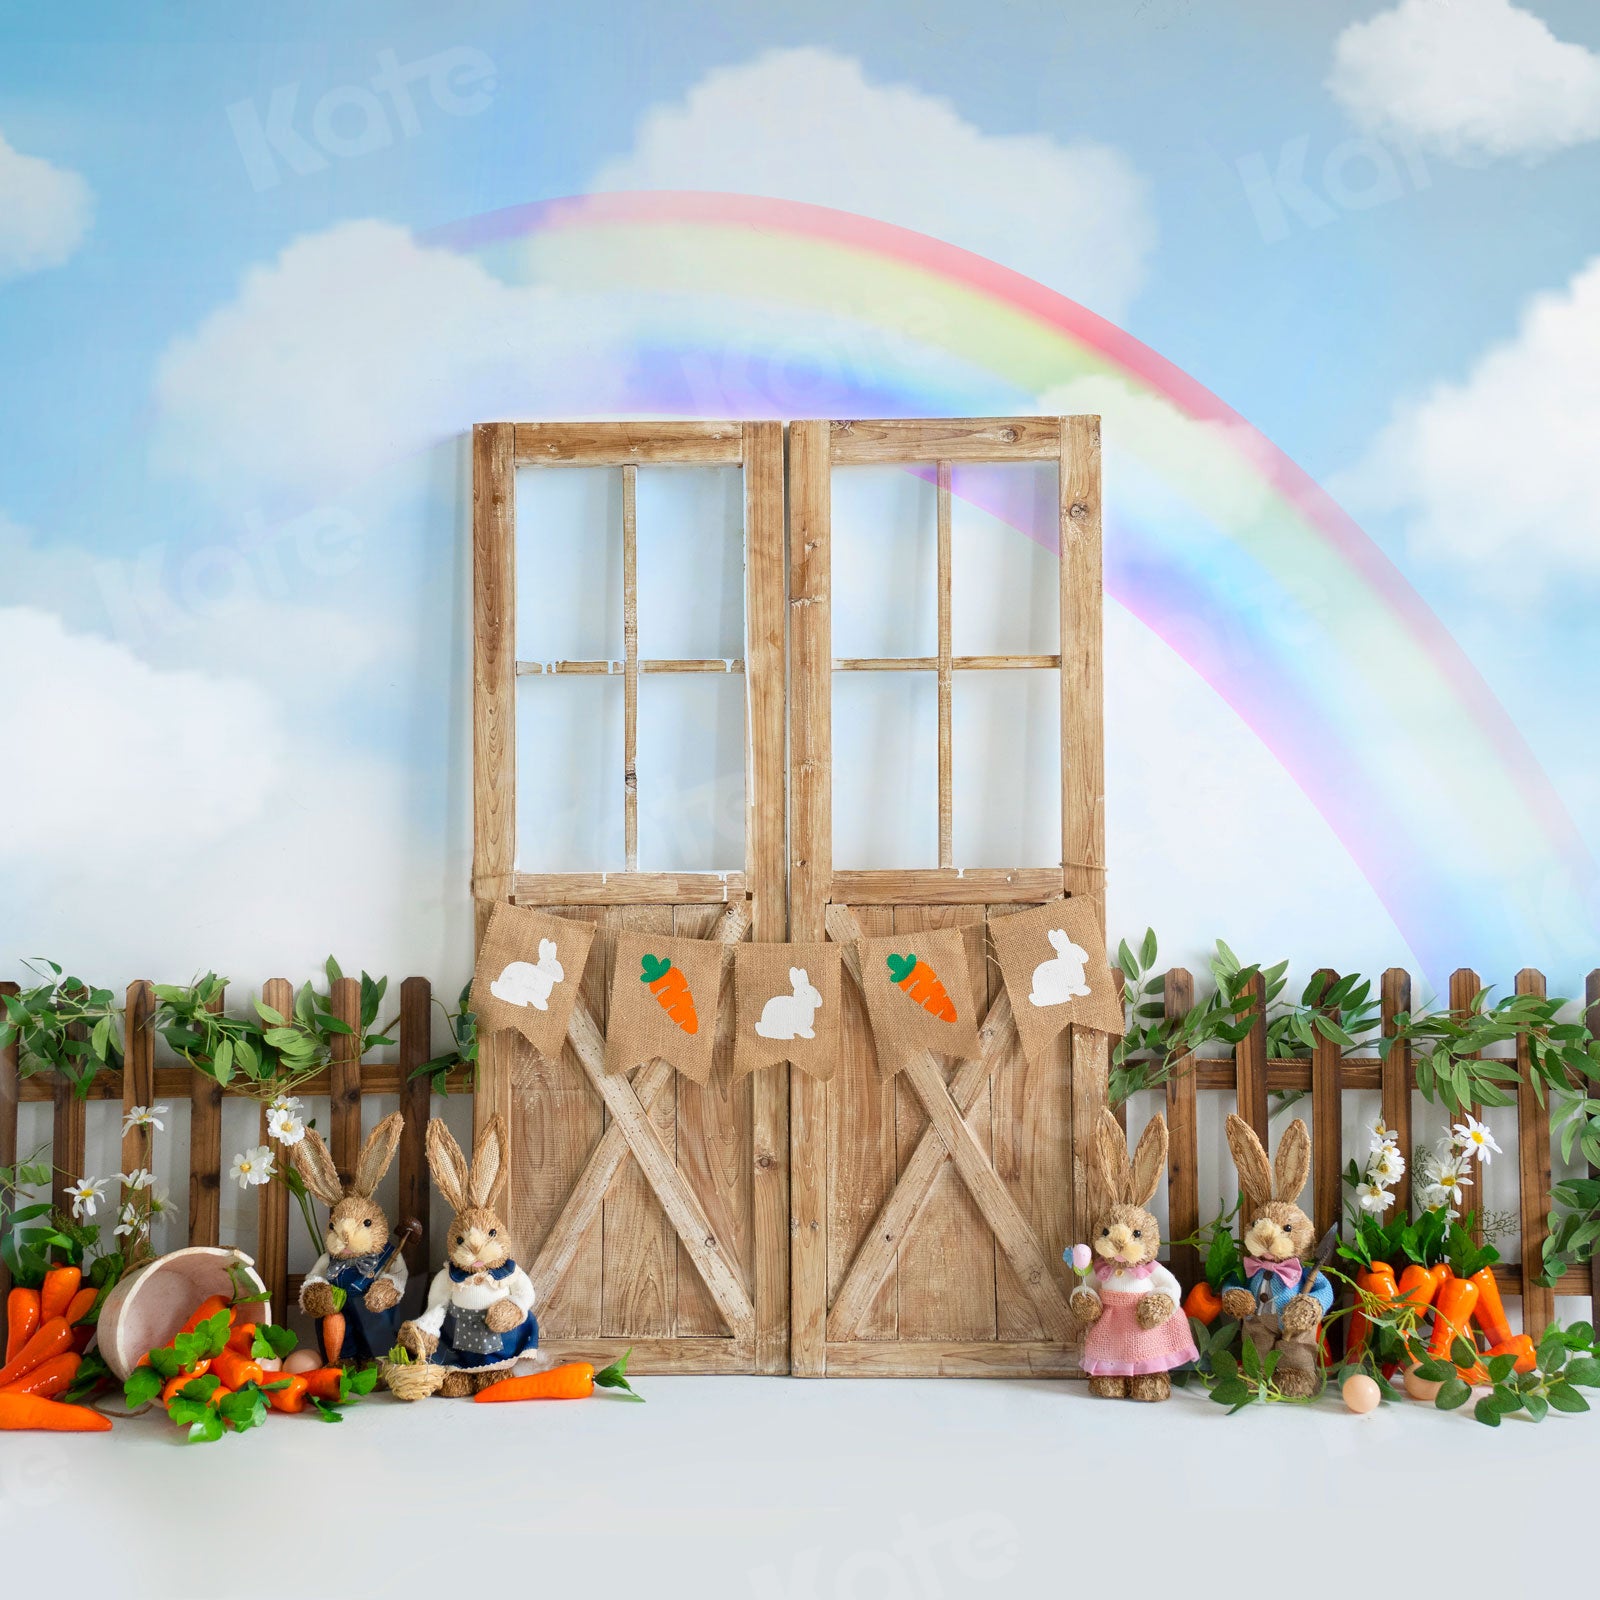 Kate Easter Bunny Rainbow Backdrop for Photography